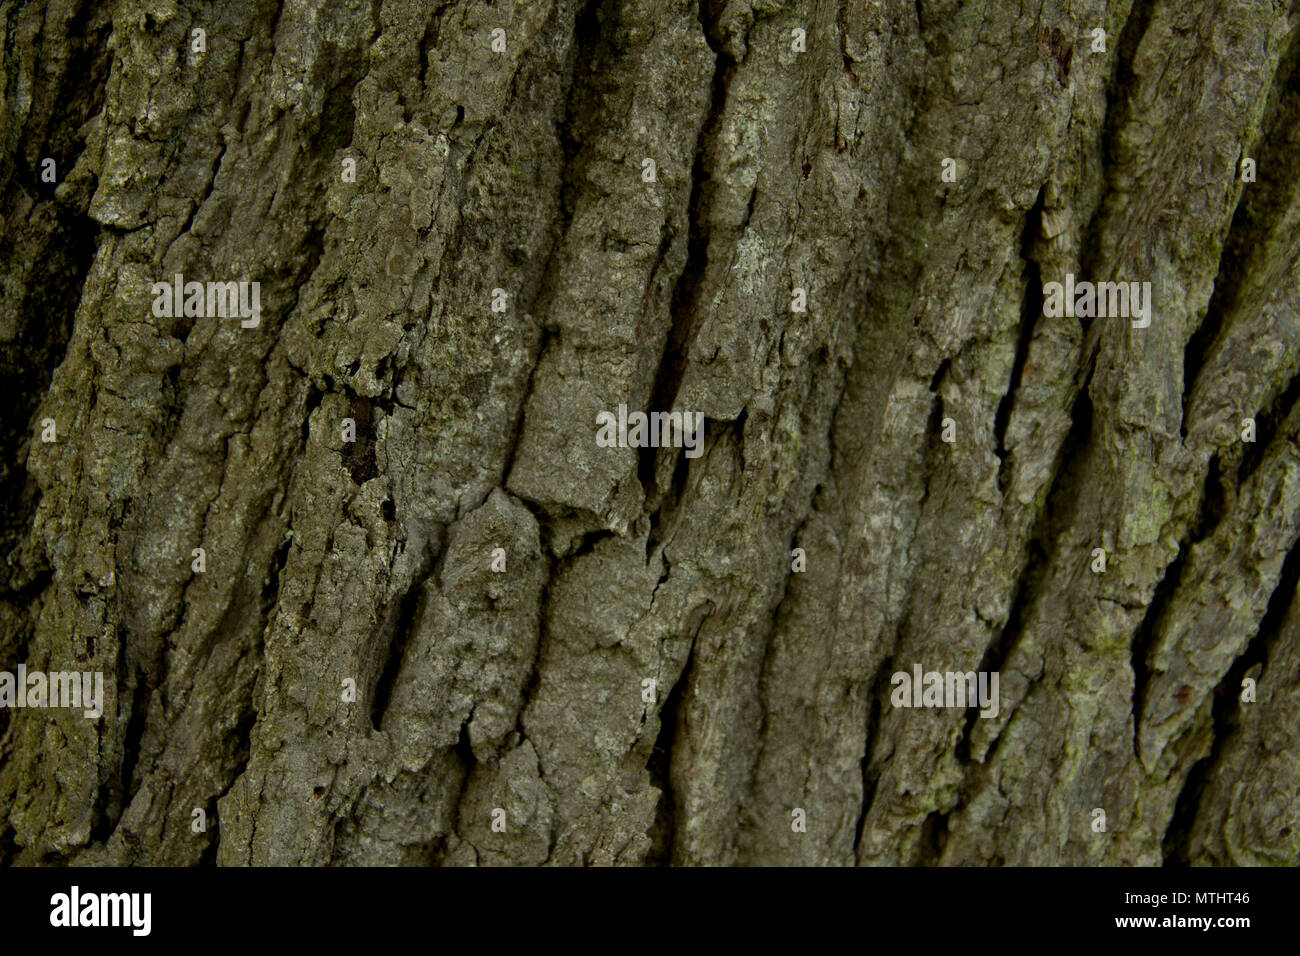 The texture of the bark in some trees, captured in a variety of locations including Upton Country Park, Durdle Door and Lulworth. Stock Photo